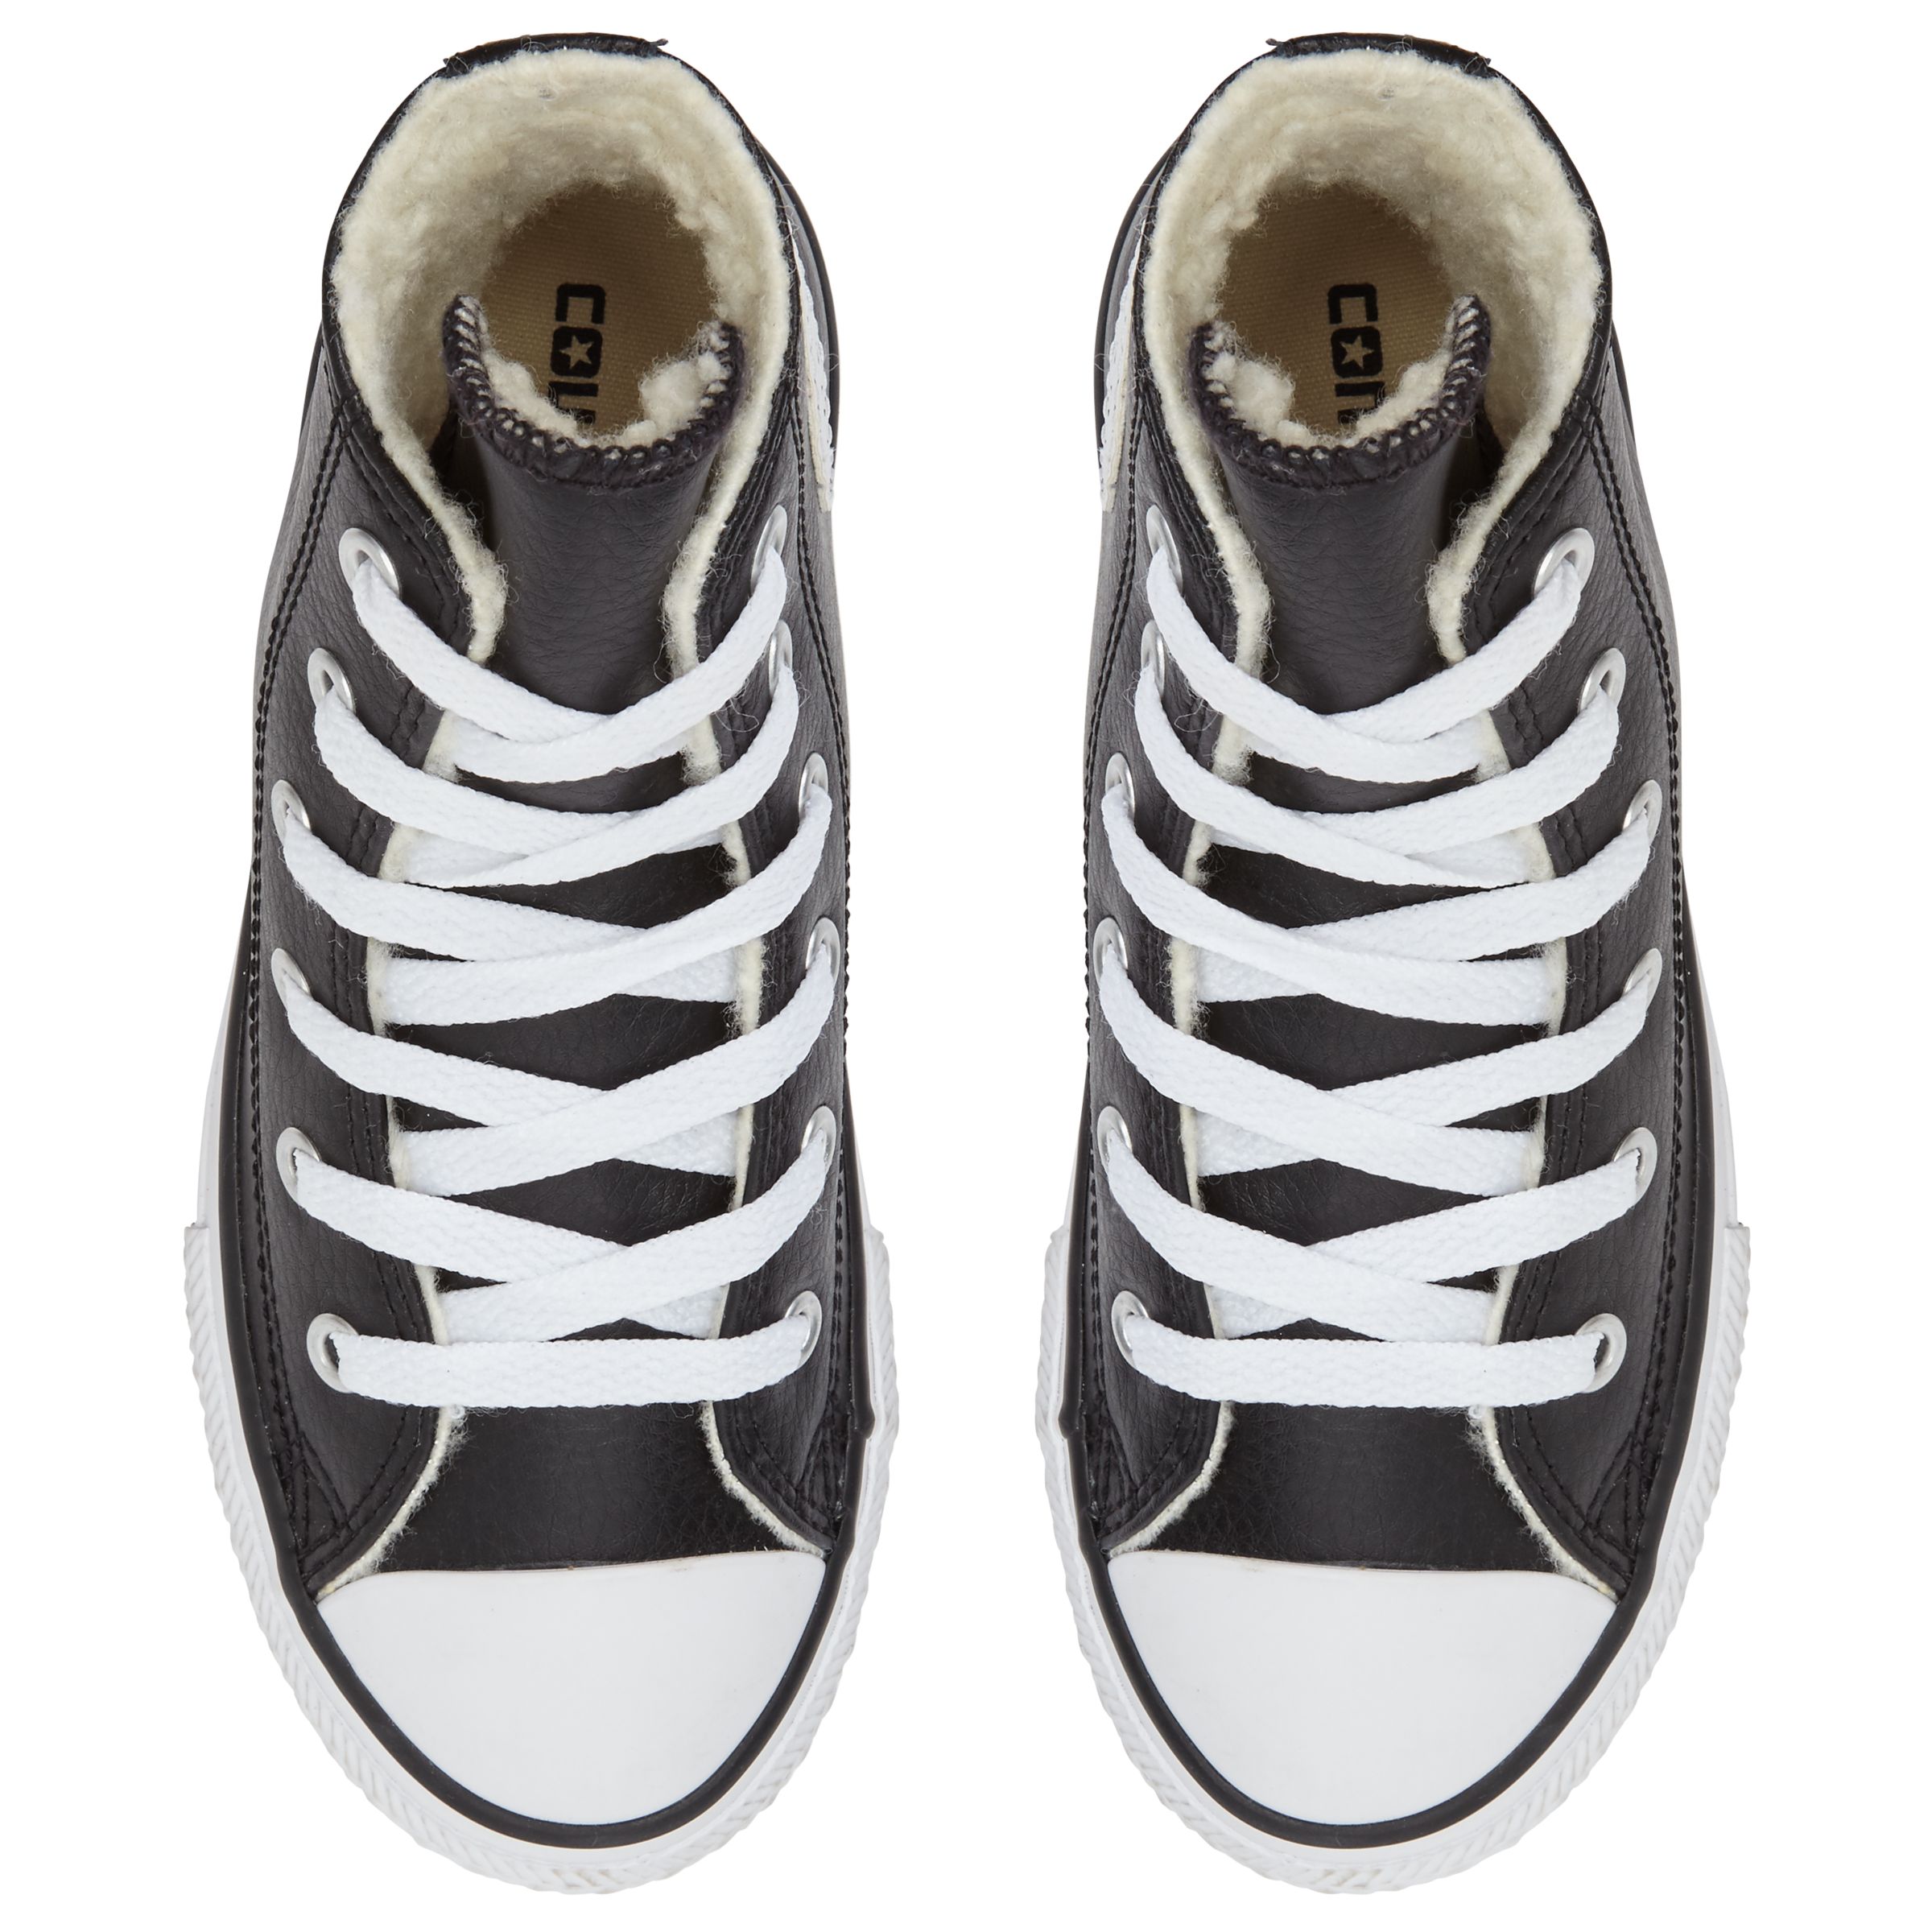 chuck taylor fur lined